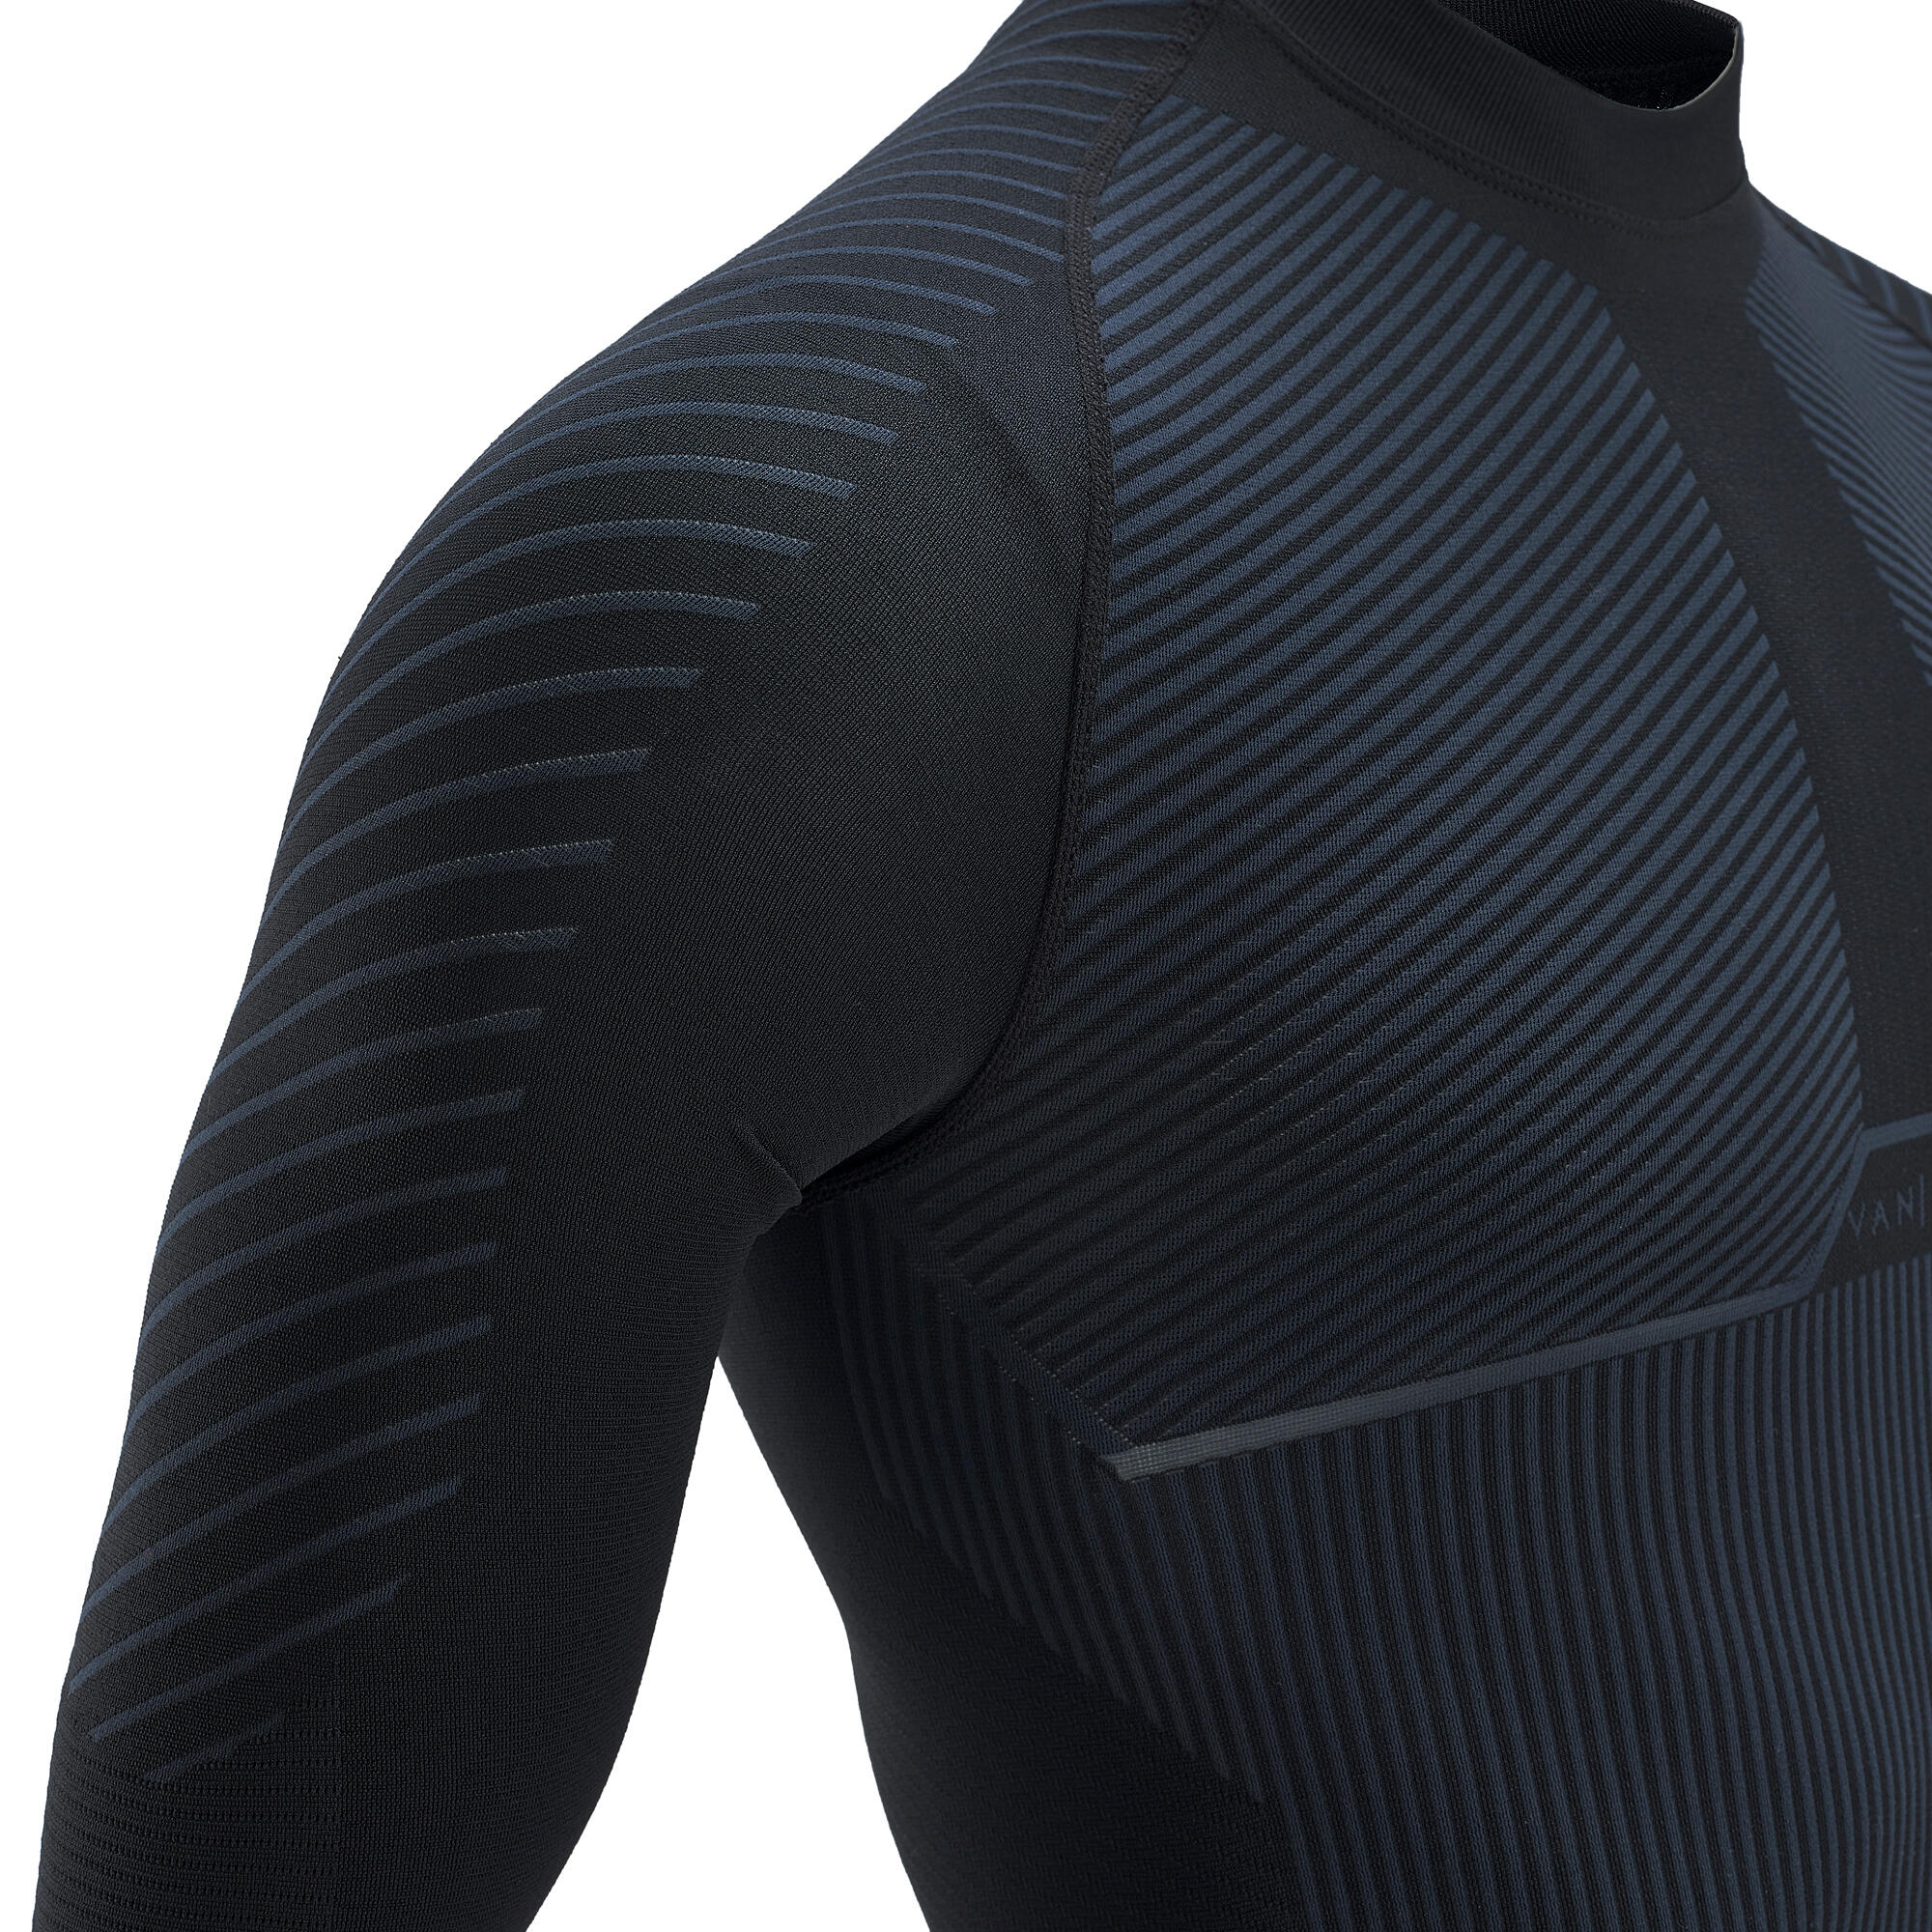 Long-Sleeved Cycling Base Layer Racer - Carbon Grey 5/7